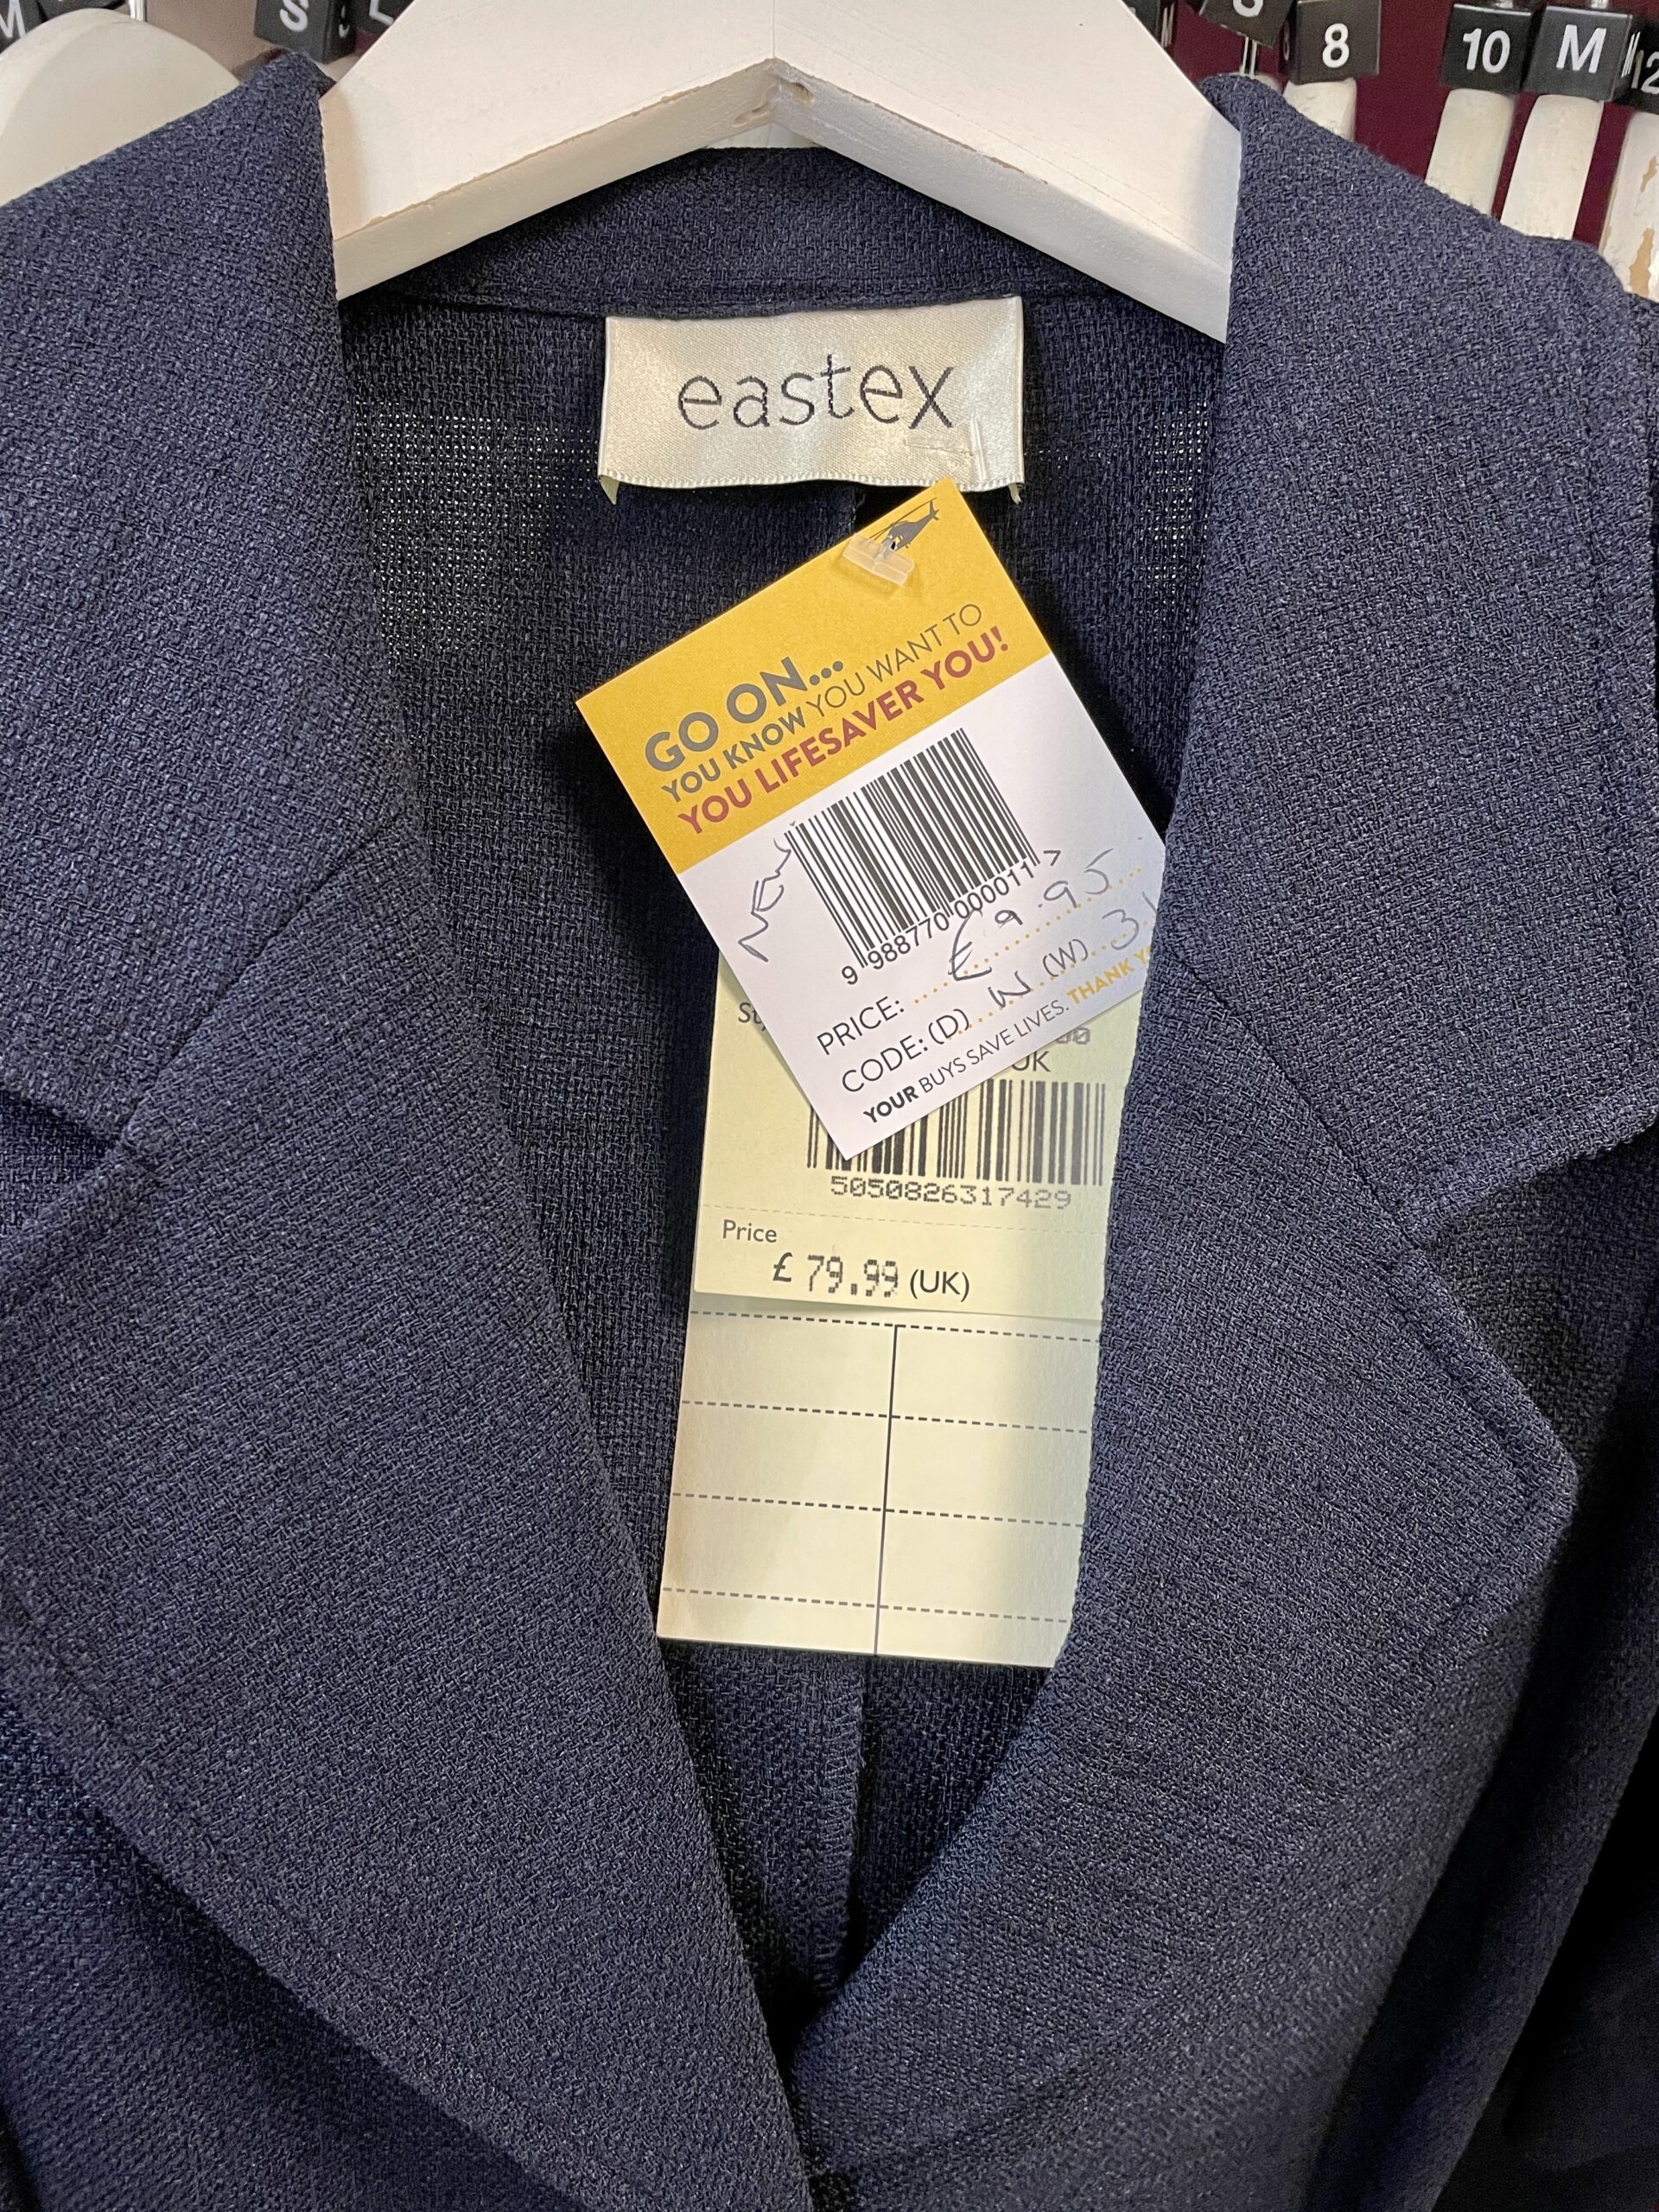 Brand new eastex with a £9.95 tag